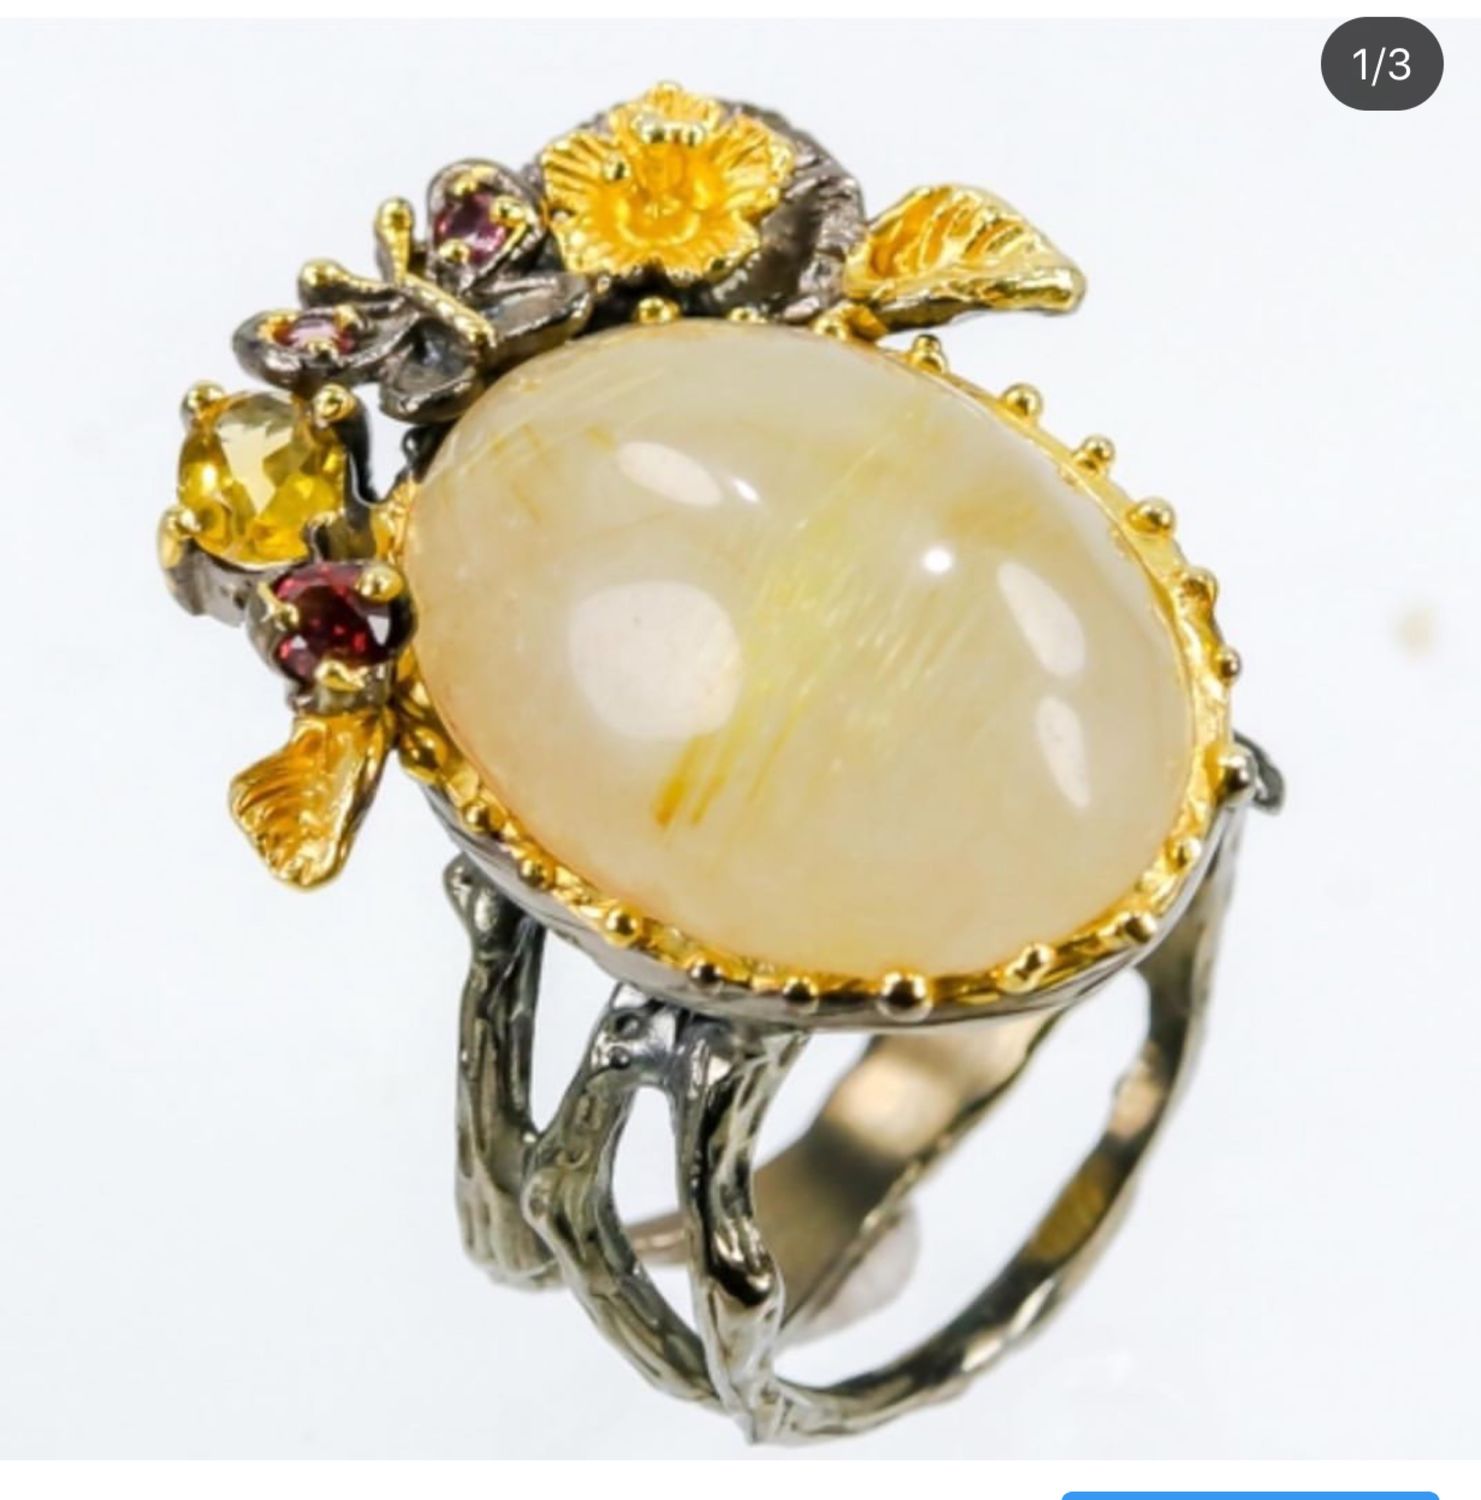 Author's ring with Rutile quartz, Rings, Moscow,  Фото №1